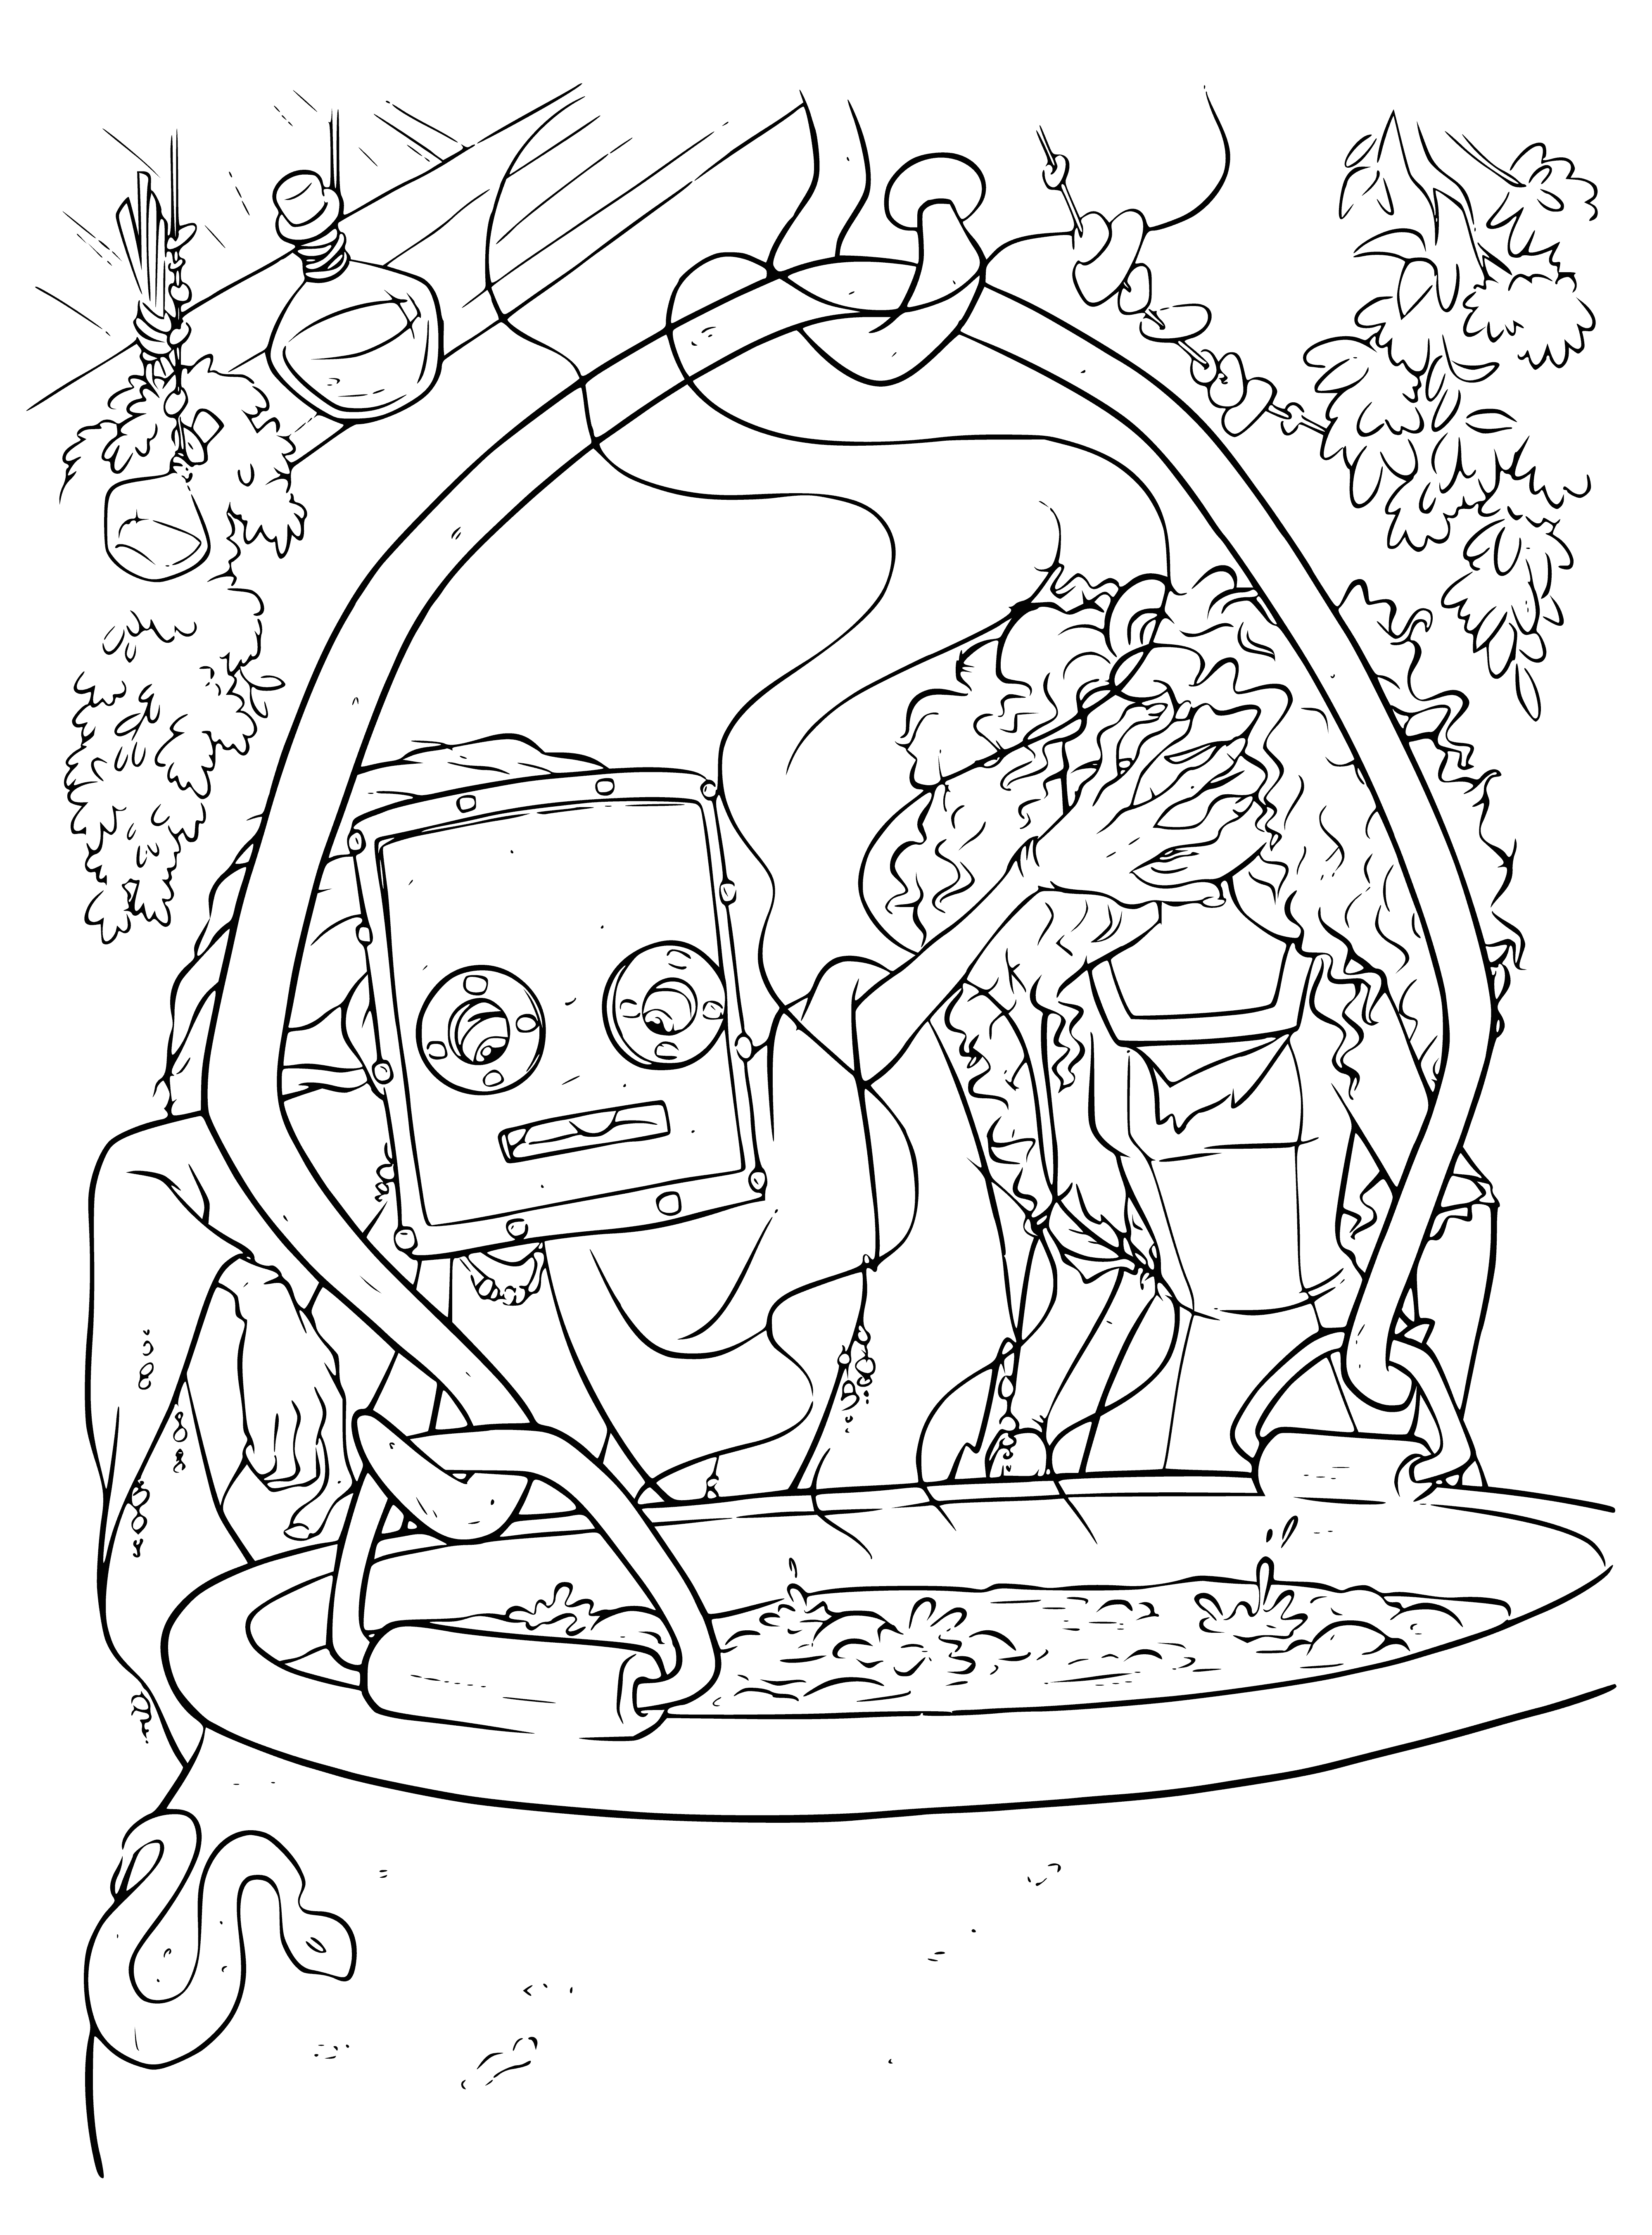 The witch prepares a potion in the cauldron coloring page